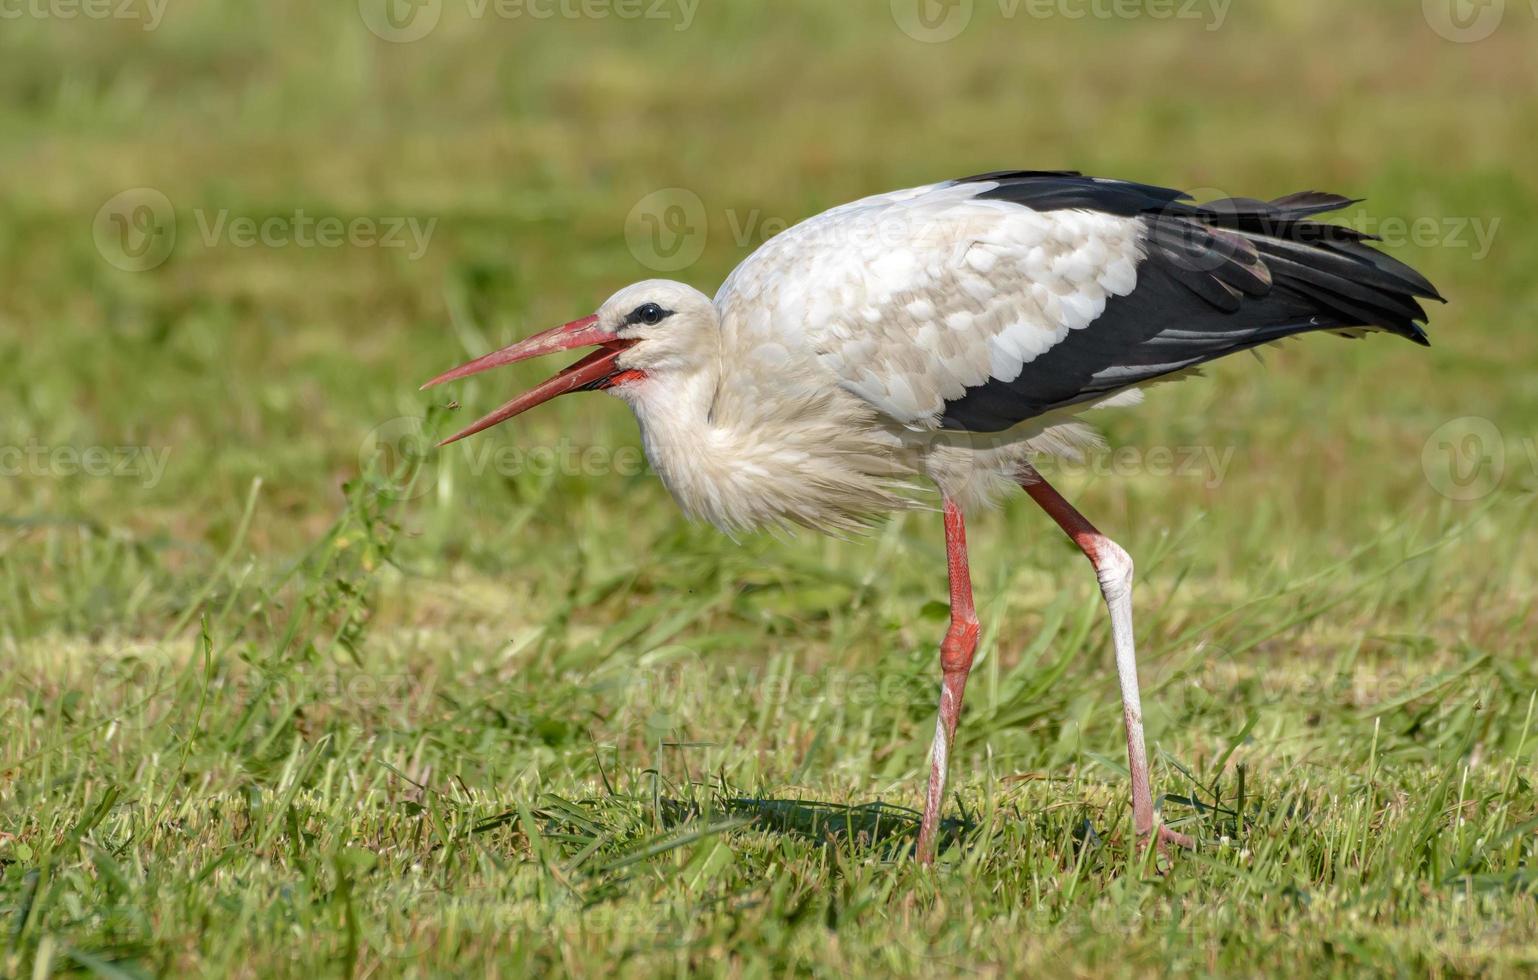 Adult White stork - Ciconia ciconia - catching an insect in the mowing hay grass field photo